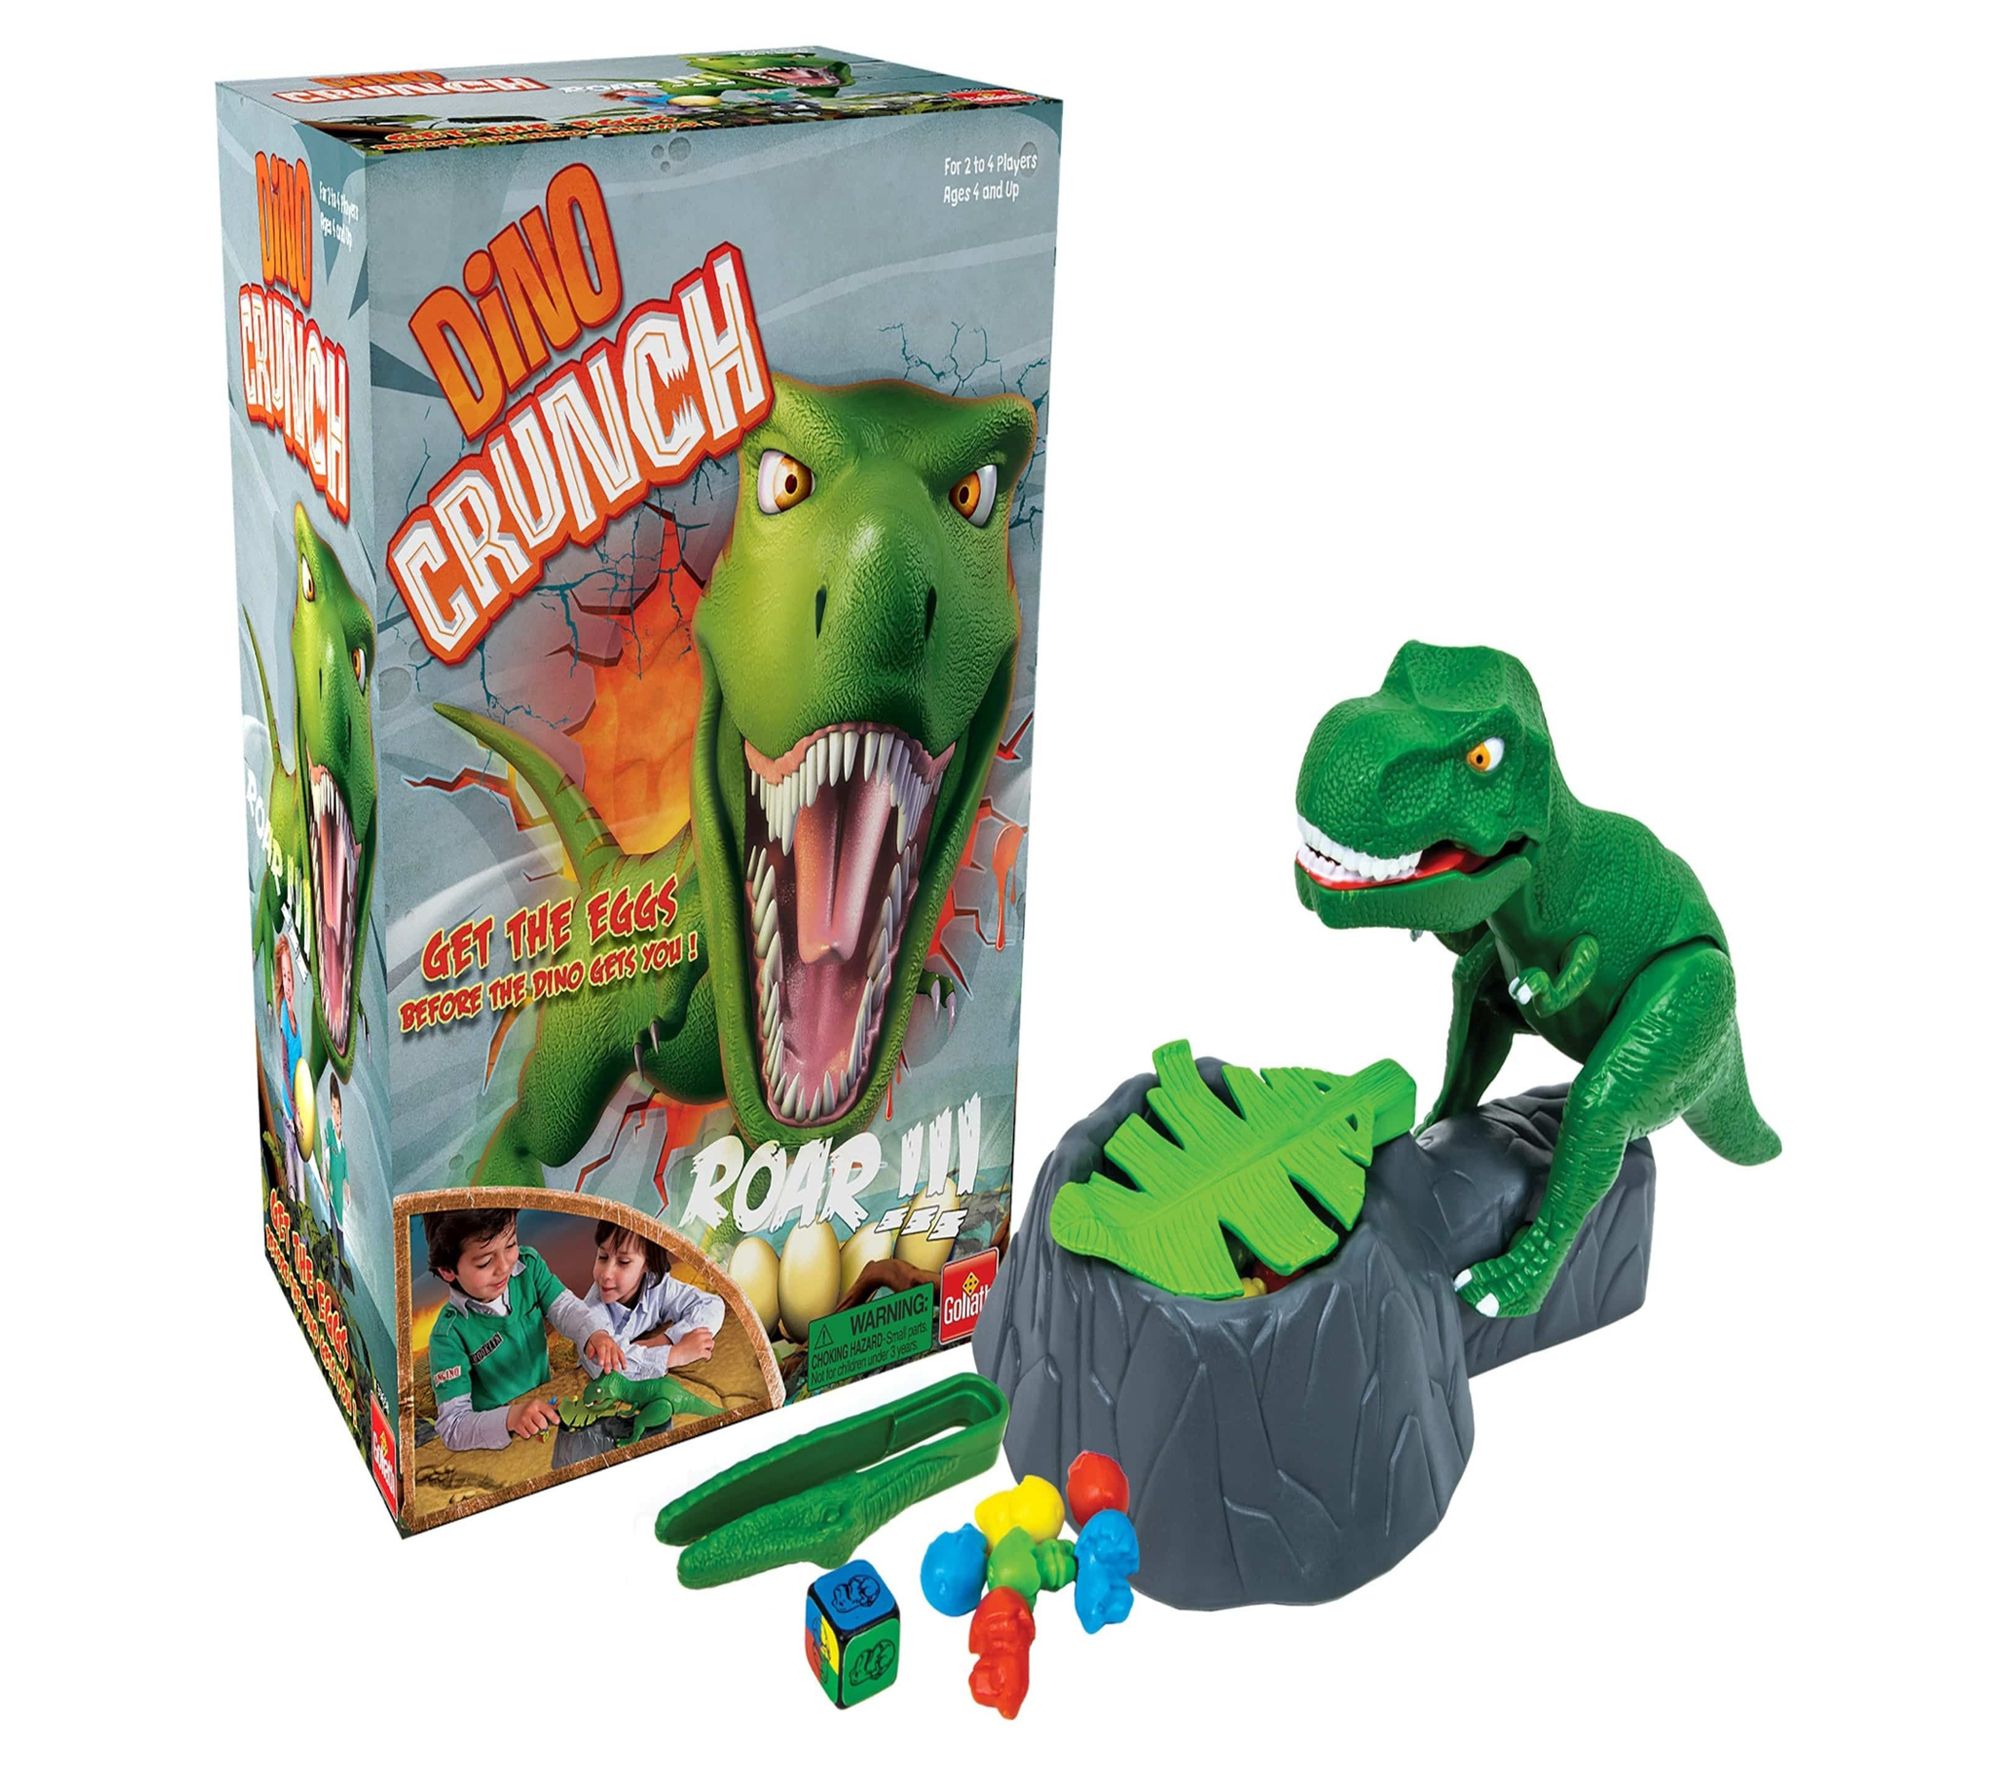 Goliath Games Dino Meal Kids Game Ages 4 and Up